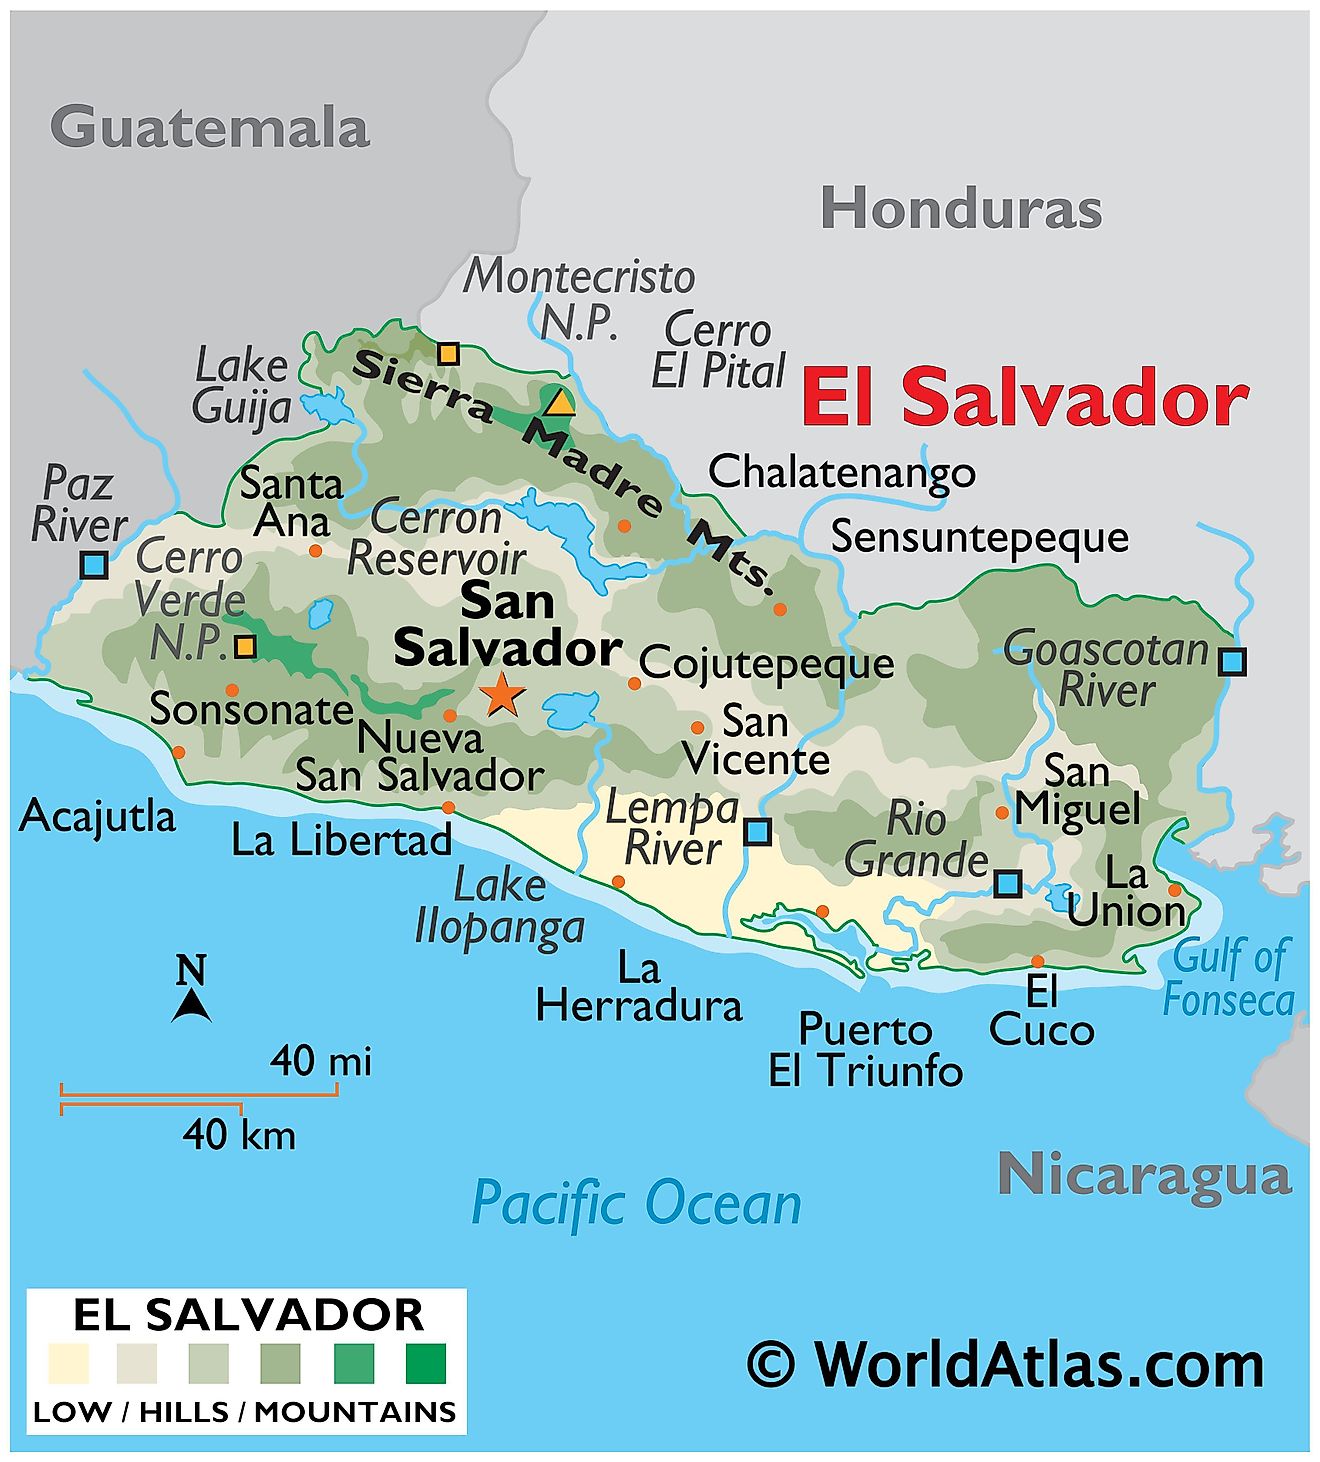 Physical Map of El Salvador showing relief, major rivers and mountain ranges, important settlements, bordering countries, etc.